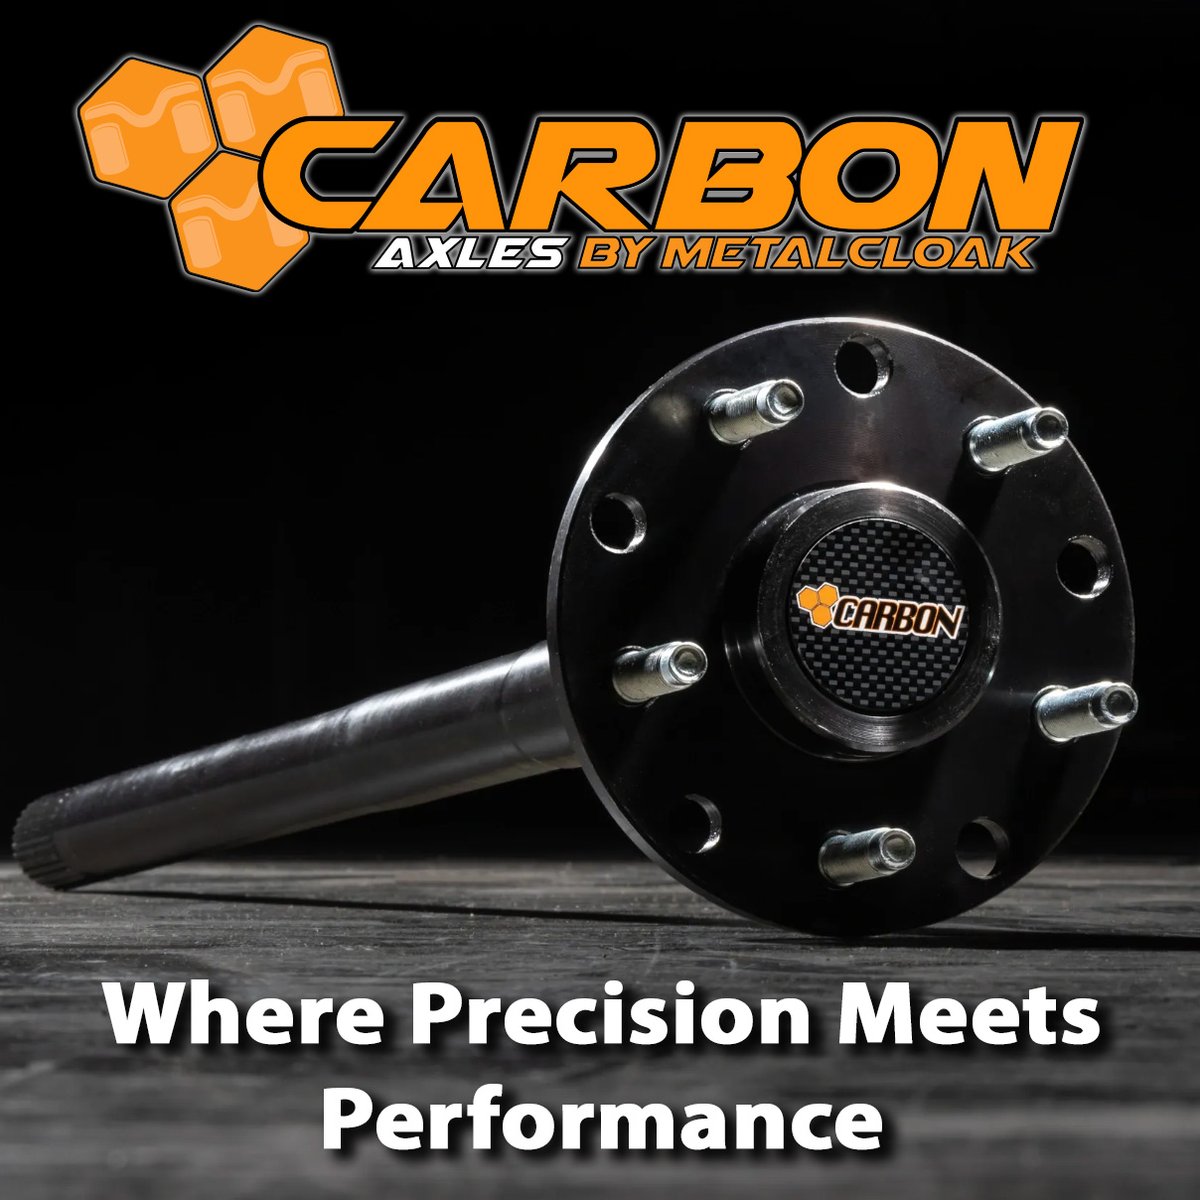 BIG NEWS! Metalcloak has Acquired Carbon Off Road Gears & Axles. This an exciting moment in our history that allows us to expand our offerings to you, our amazing customers. 
You Can Read the Full Press Release here... vist.ly/34n2i